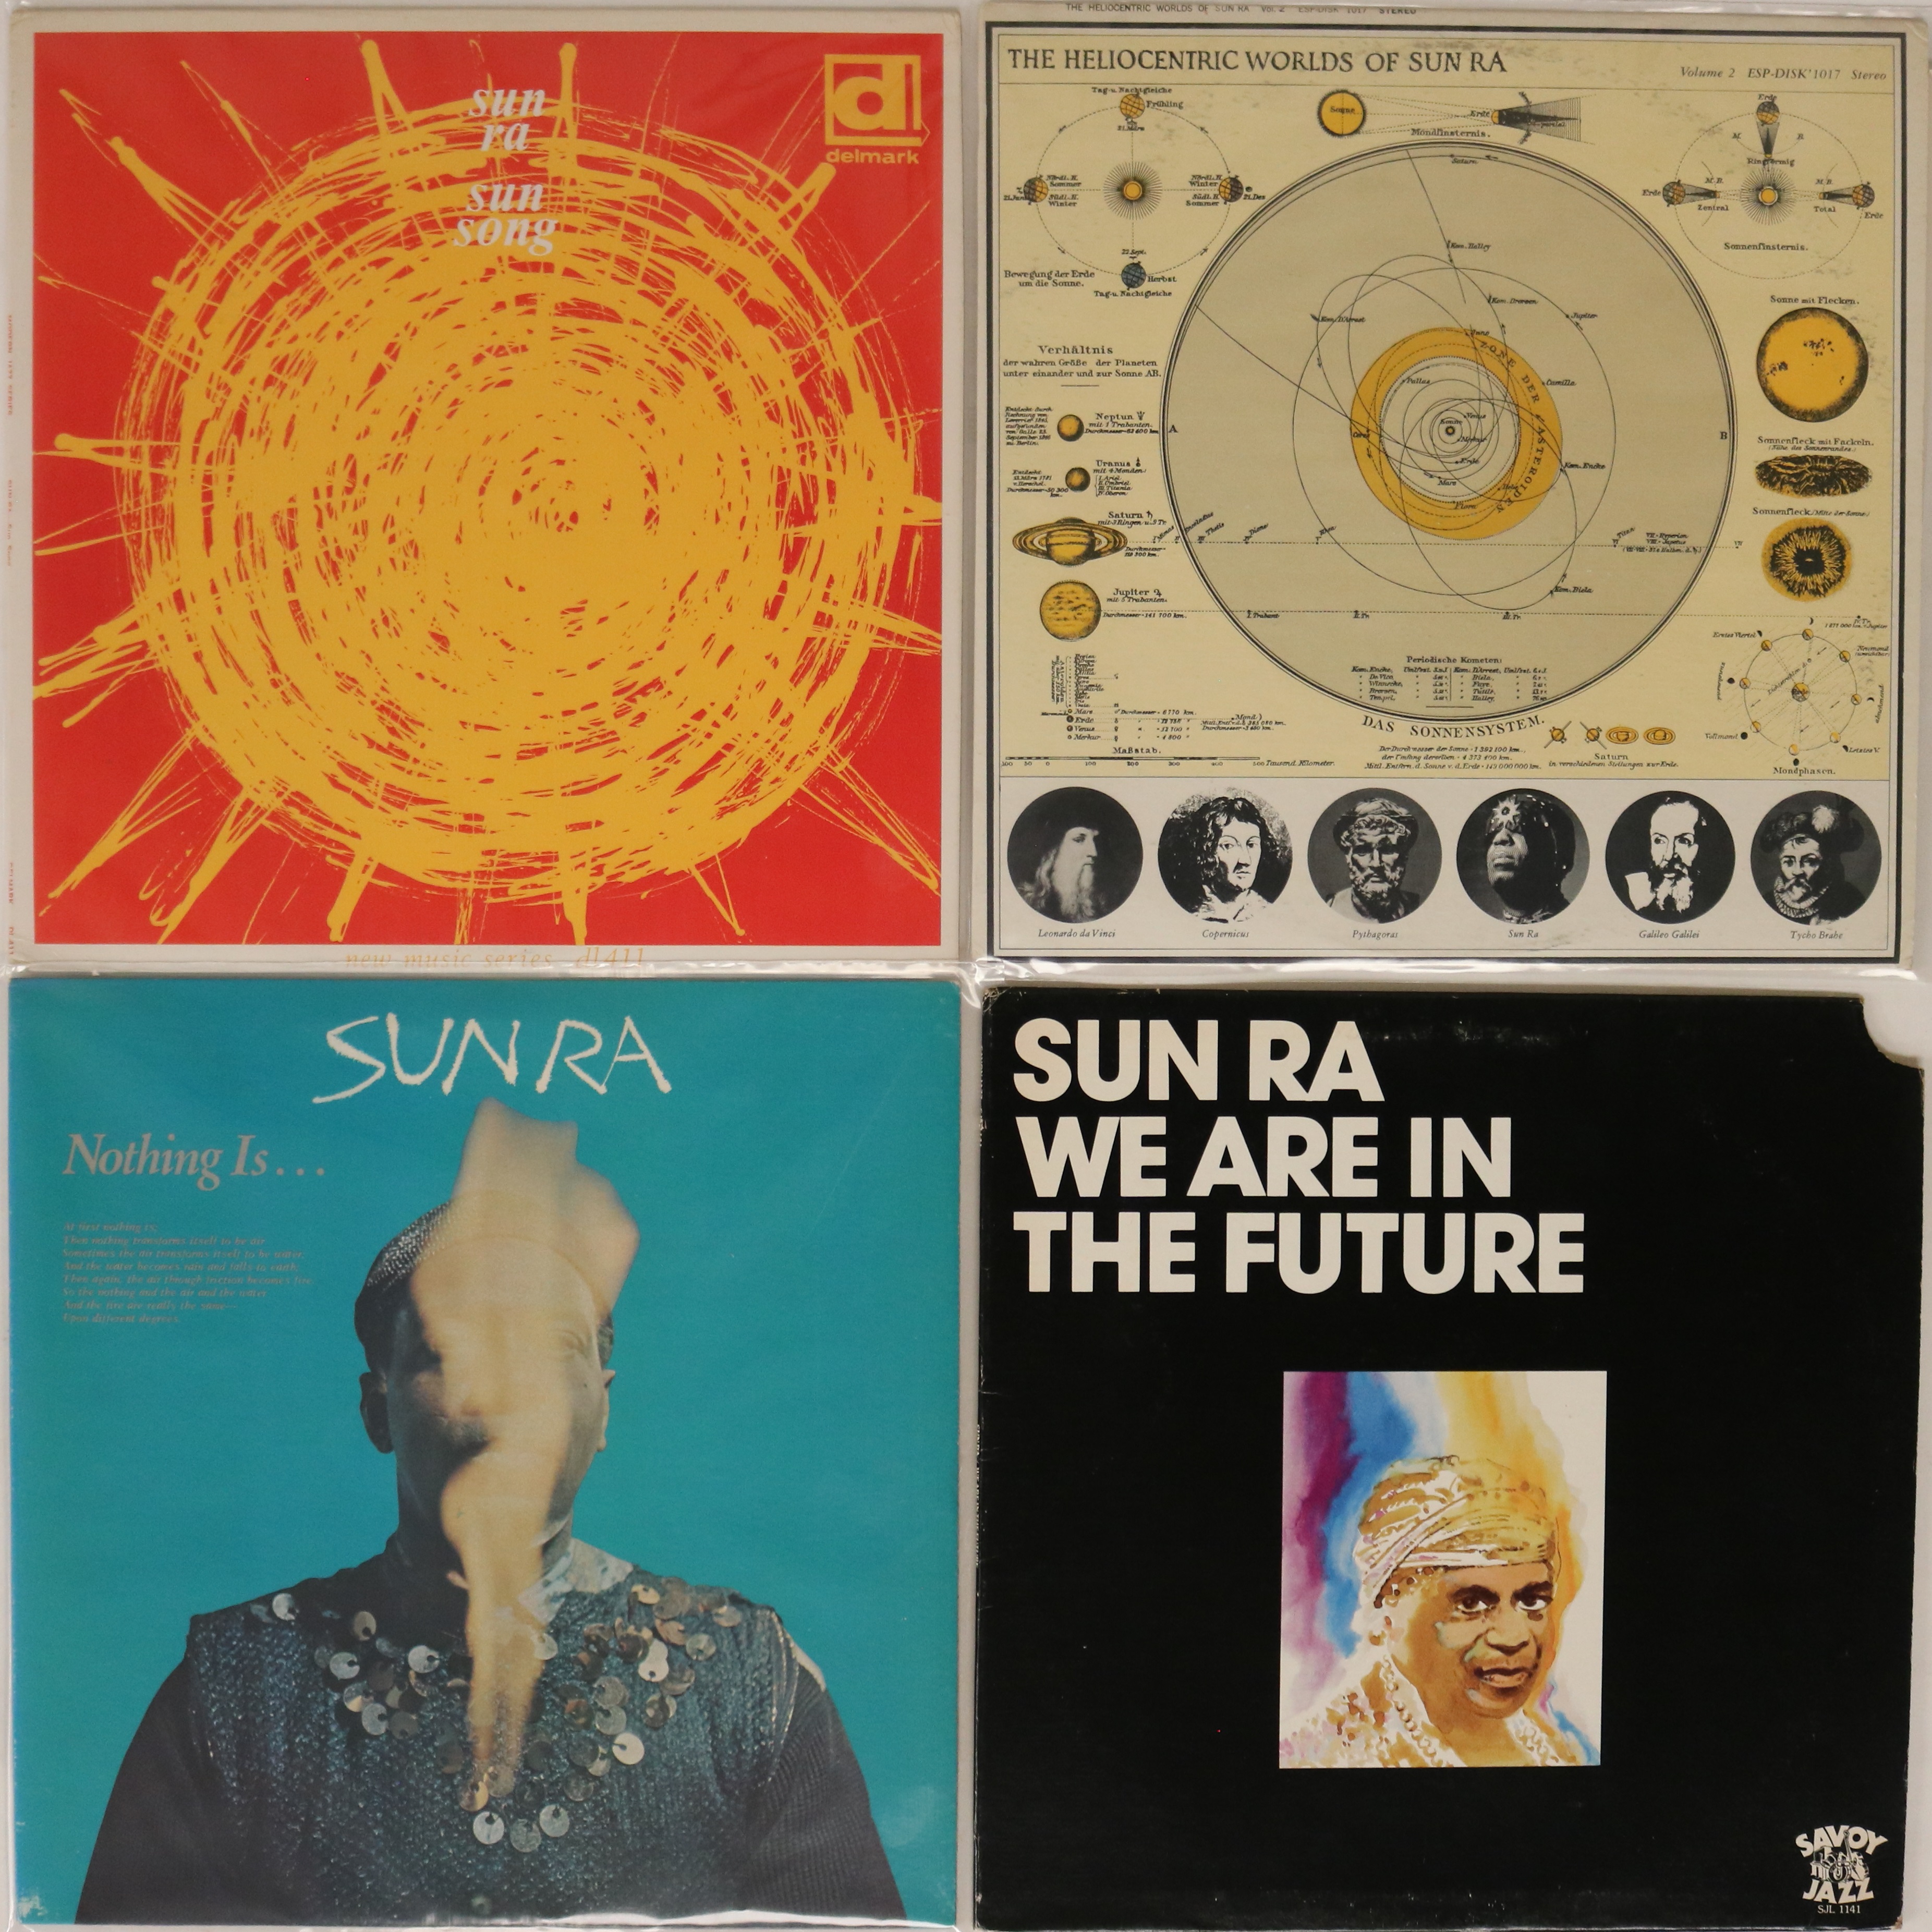 SUN RA - LPs. Entering the heliocentric world of Sun Ra with these 4 x original title LPs.